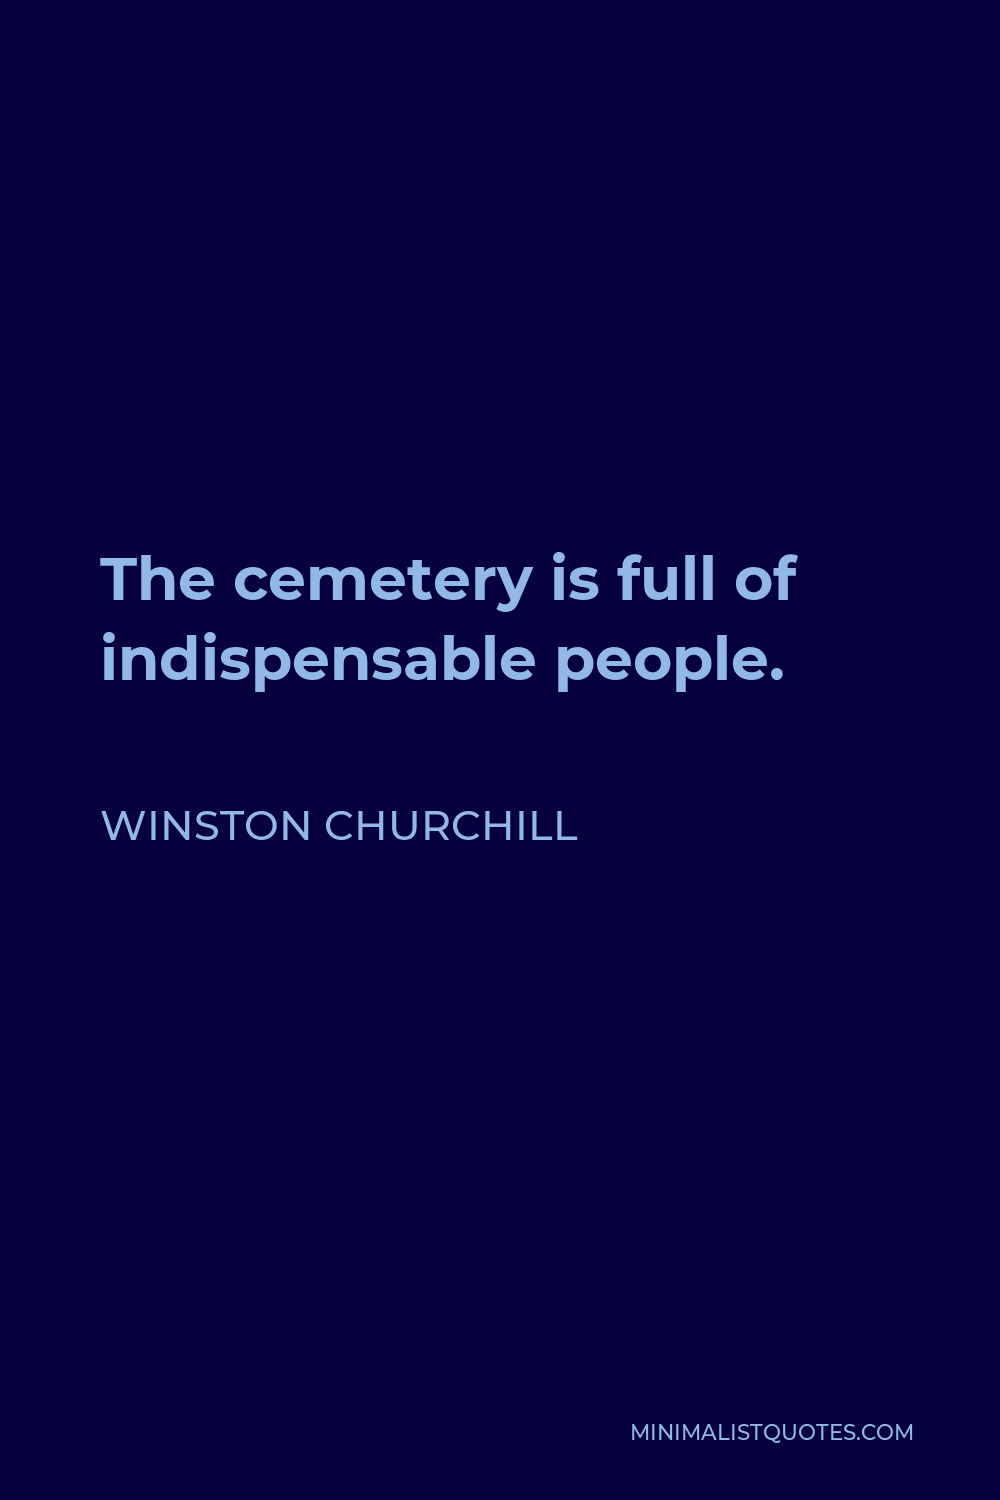 Winston Churchill Quote - The cemetery is full of indispensable people.